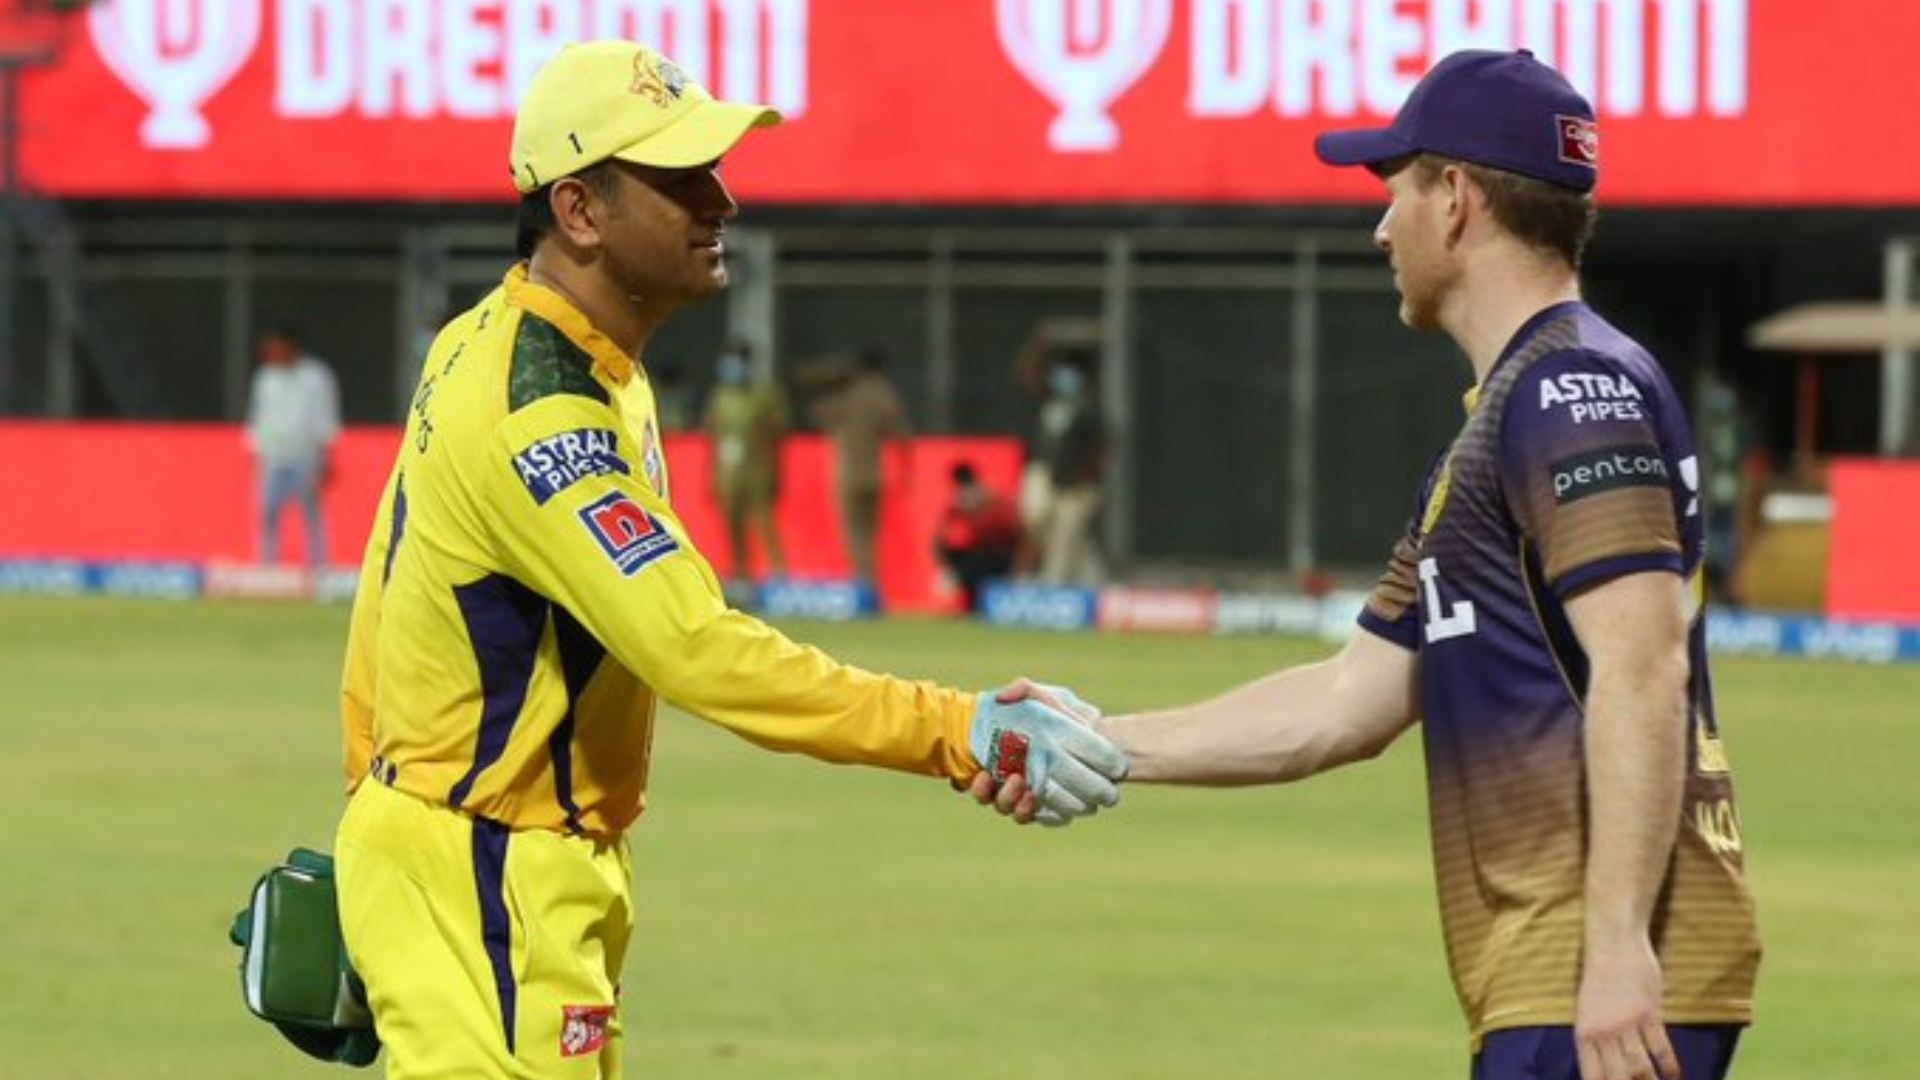 Kolkata Knight Riders staged a remarkable fightback but still suffered a 20-run loss to Chennai Super Kings.